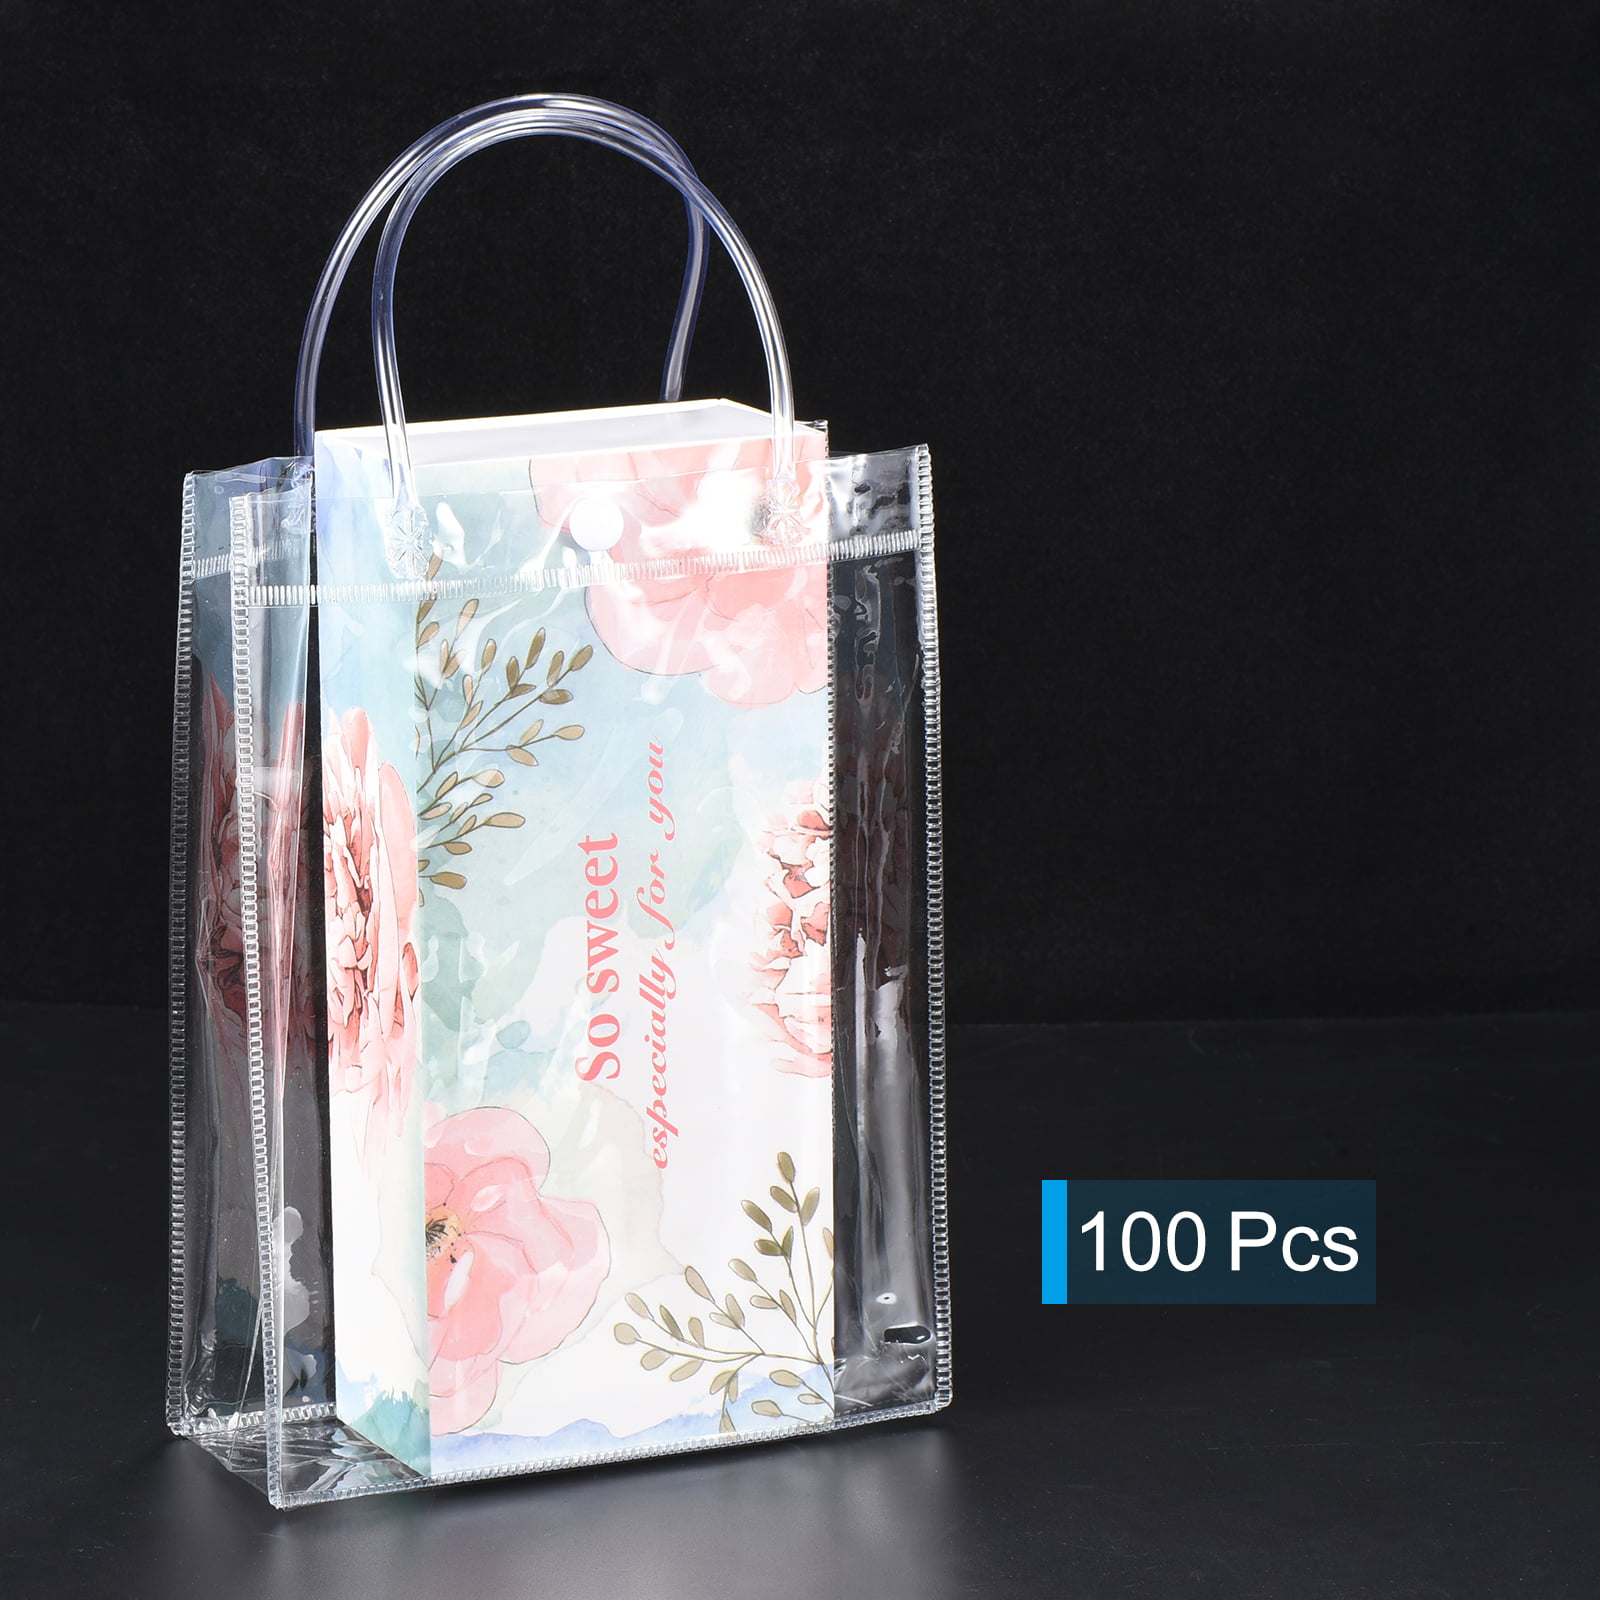 Plastic Gift Bags, Sdootjewelry 36 Pcs Clear PVC Gift Bags with Handles 7.5  x 2.8 x 9.1 Heavy Duty Gift Tote Bag Bulk, Transparent Shopping Tote Bag  for Christmas Gift Favor, Party, Weddings